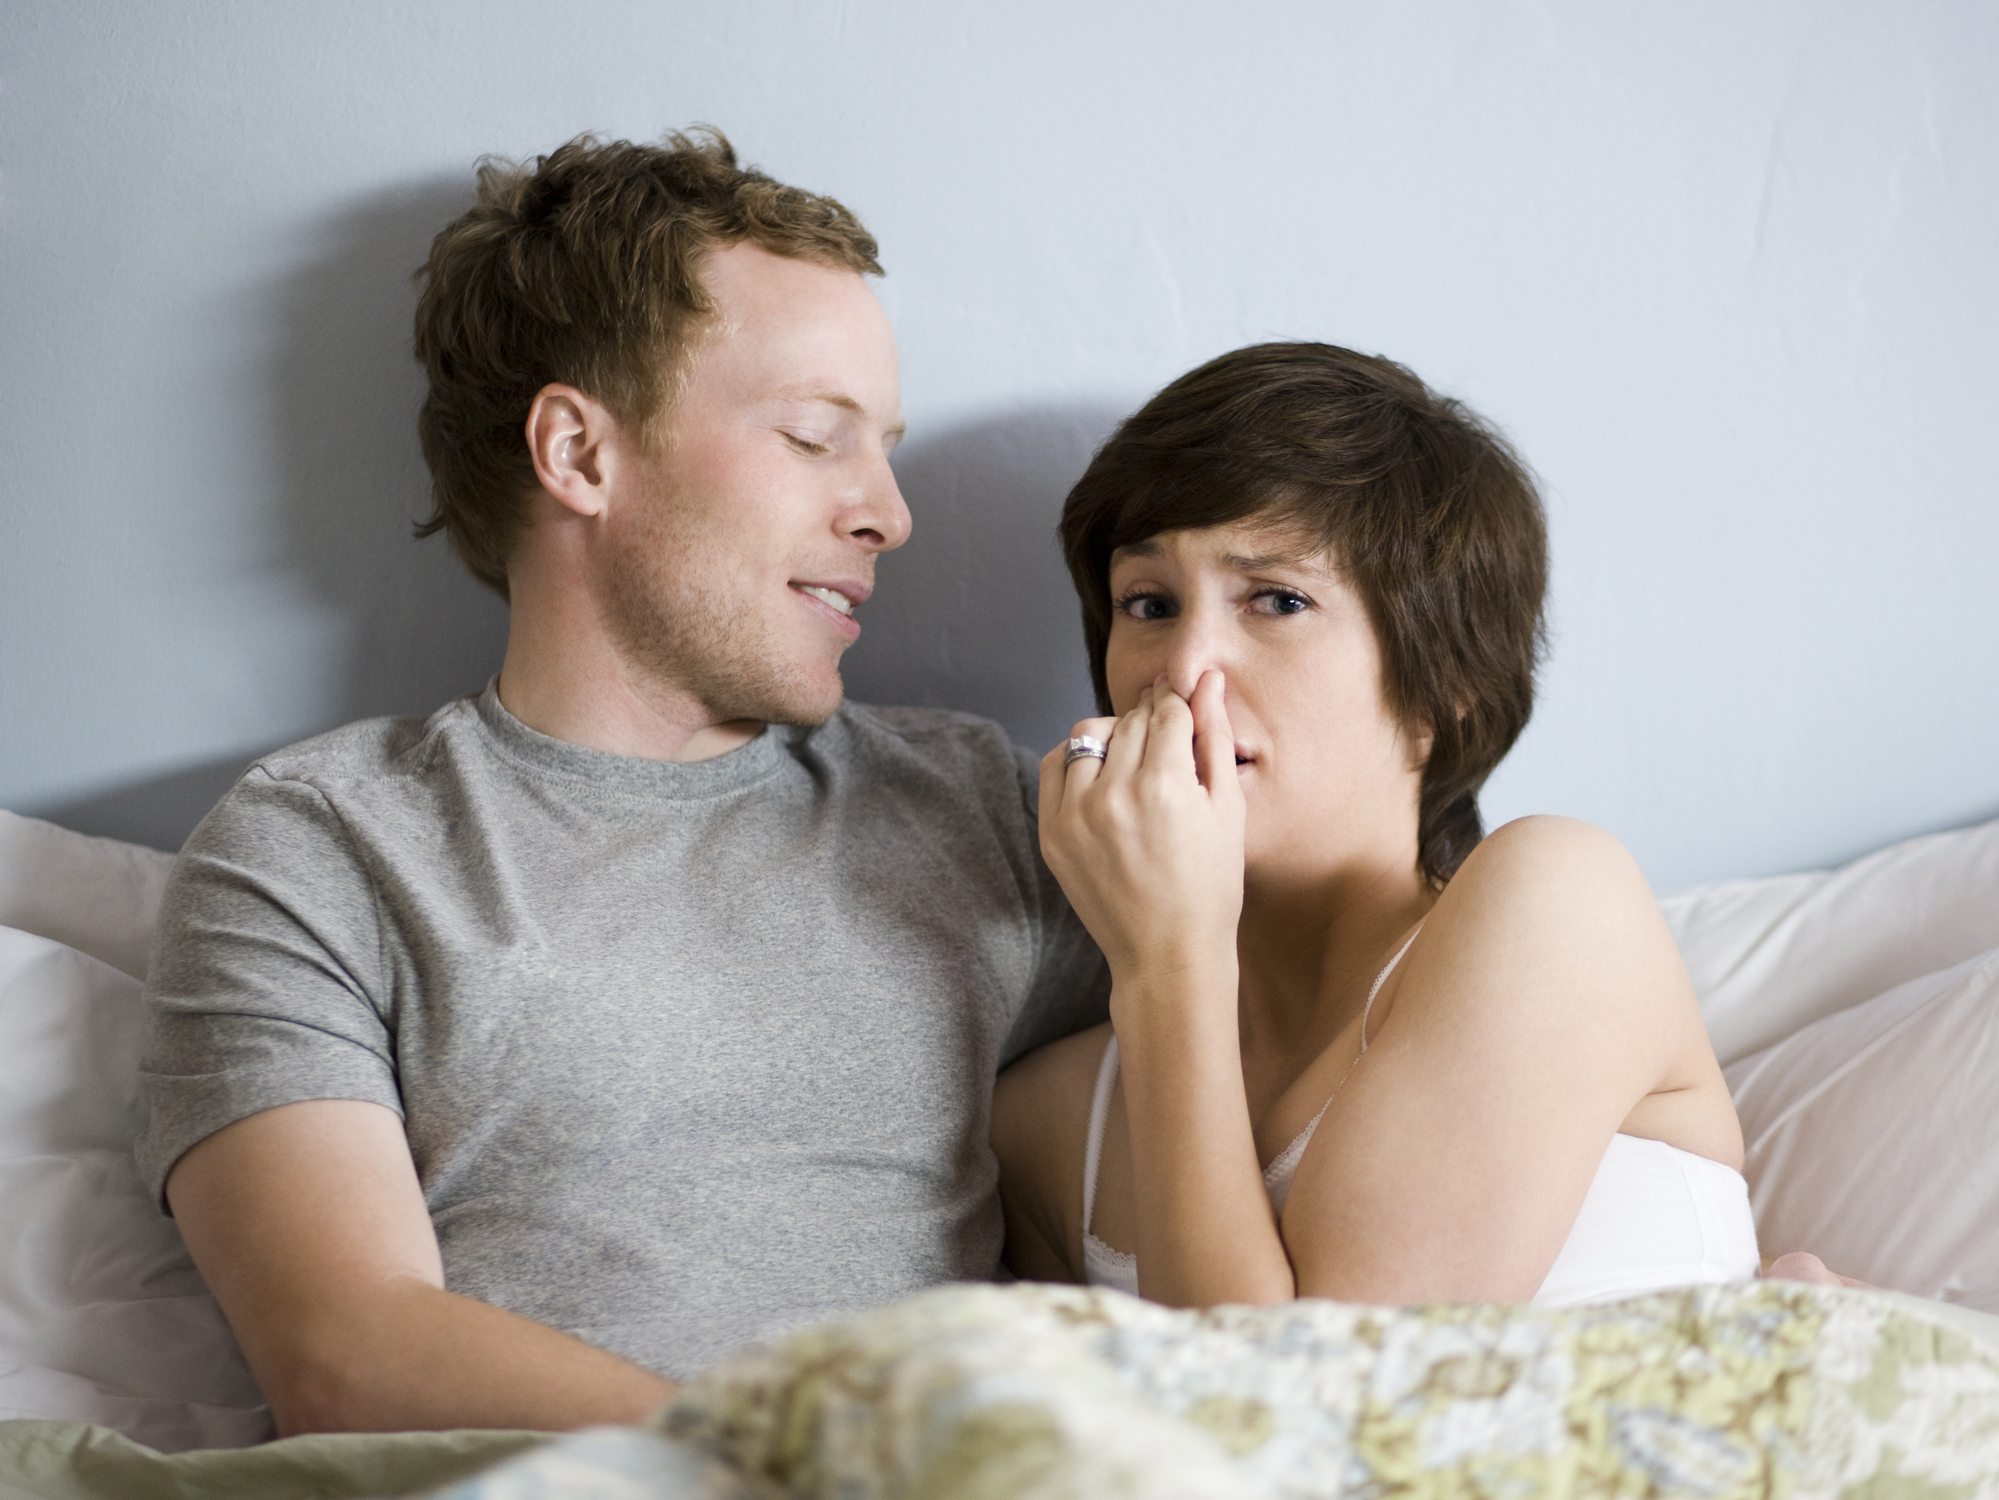 A man and a woman sitting up in bed and the woman has her fingers covering her nose